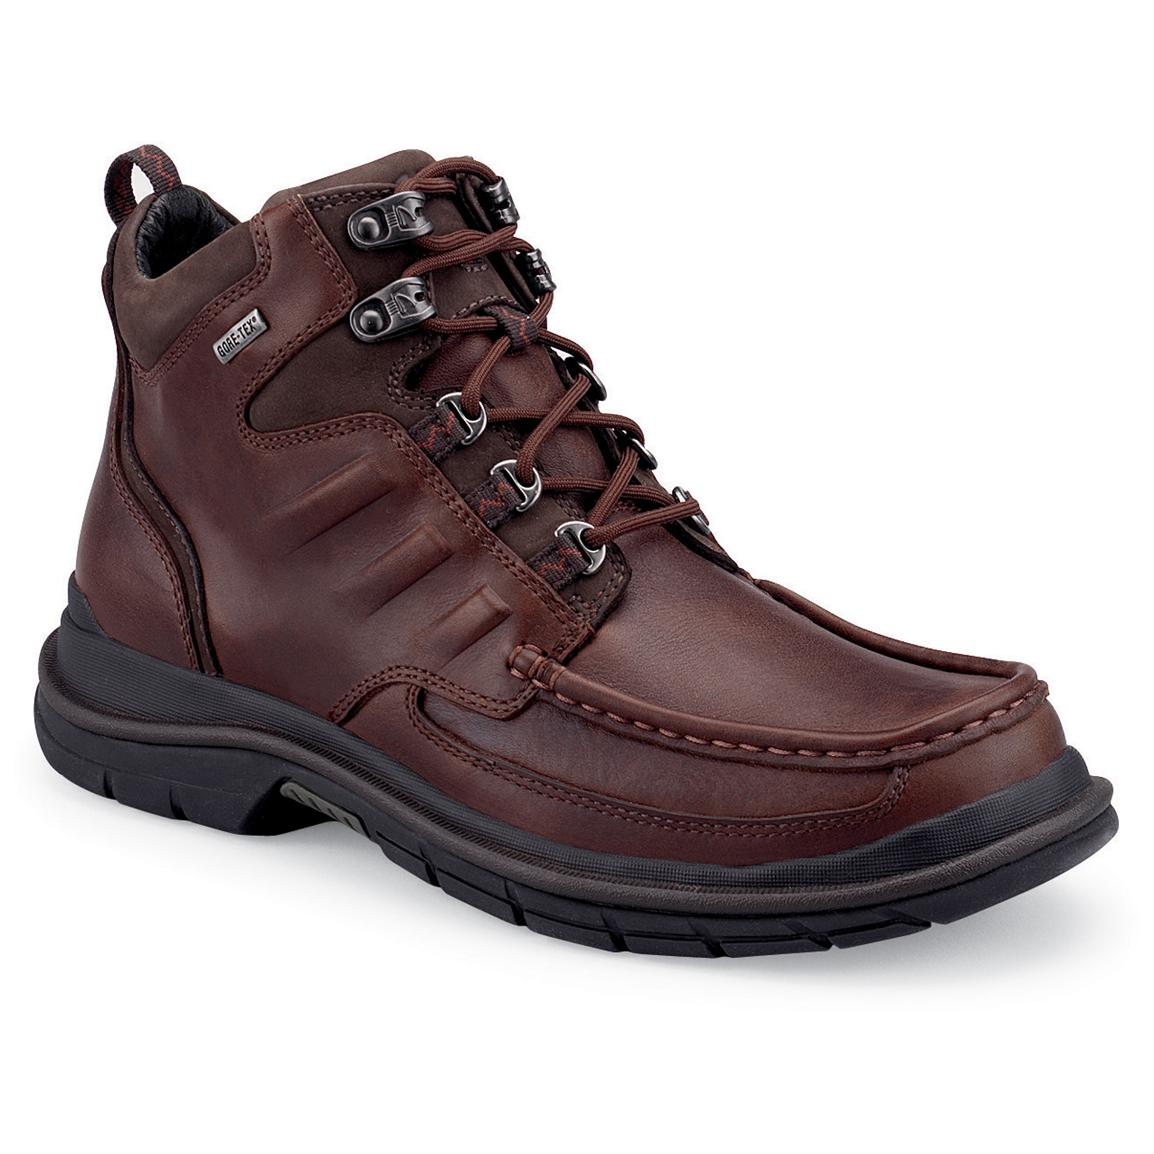 Men's Clarks® Cedar Boots - 126776, Casual Shoes at Sportsman's Guide